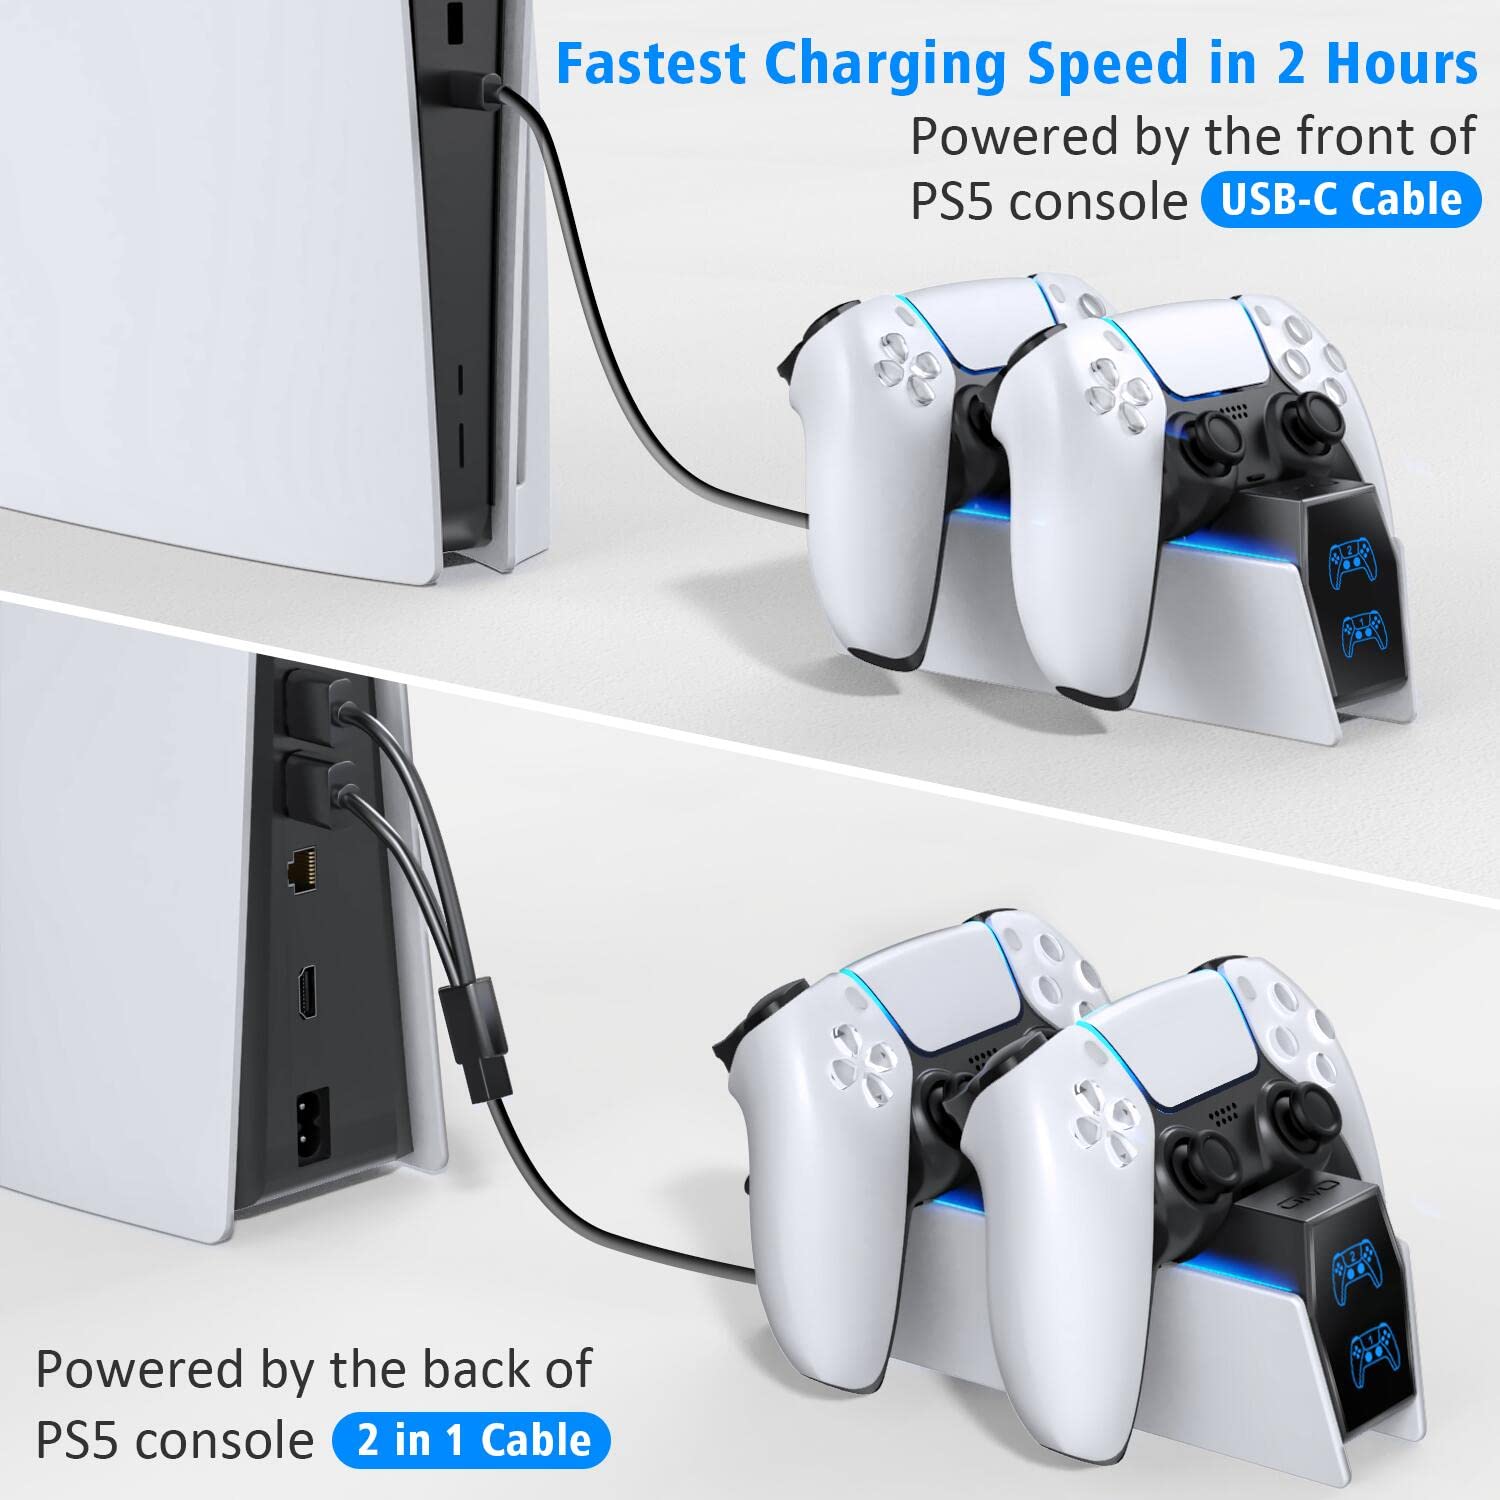 PS5 Charging Station, OIVO 2H Fast PS5 Controller Charger for Playstation 5 Dualsense Controller, Upgrade PS5 Charging Dock with 2 Types of Cable, PS5 Charger for Dual PS5 Controller